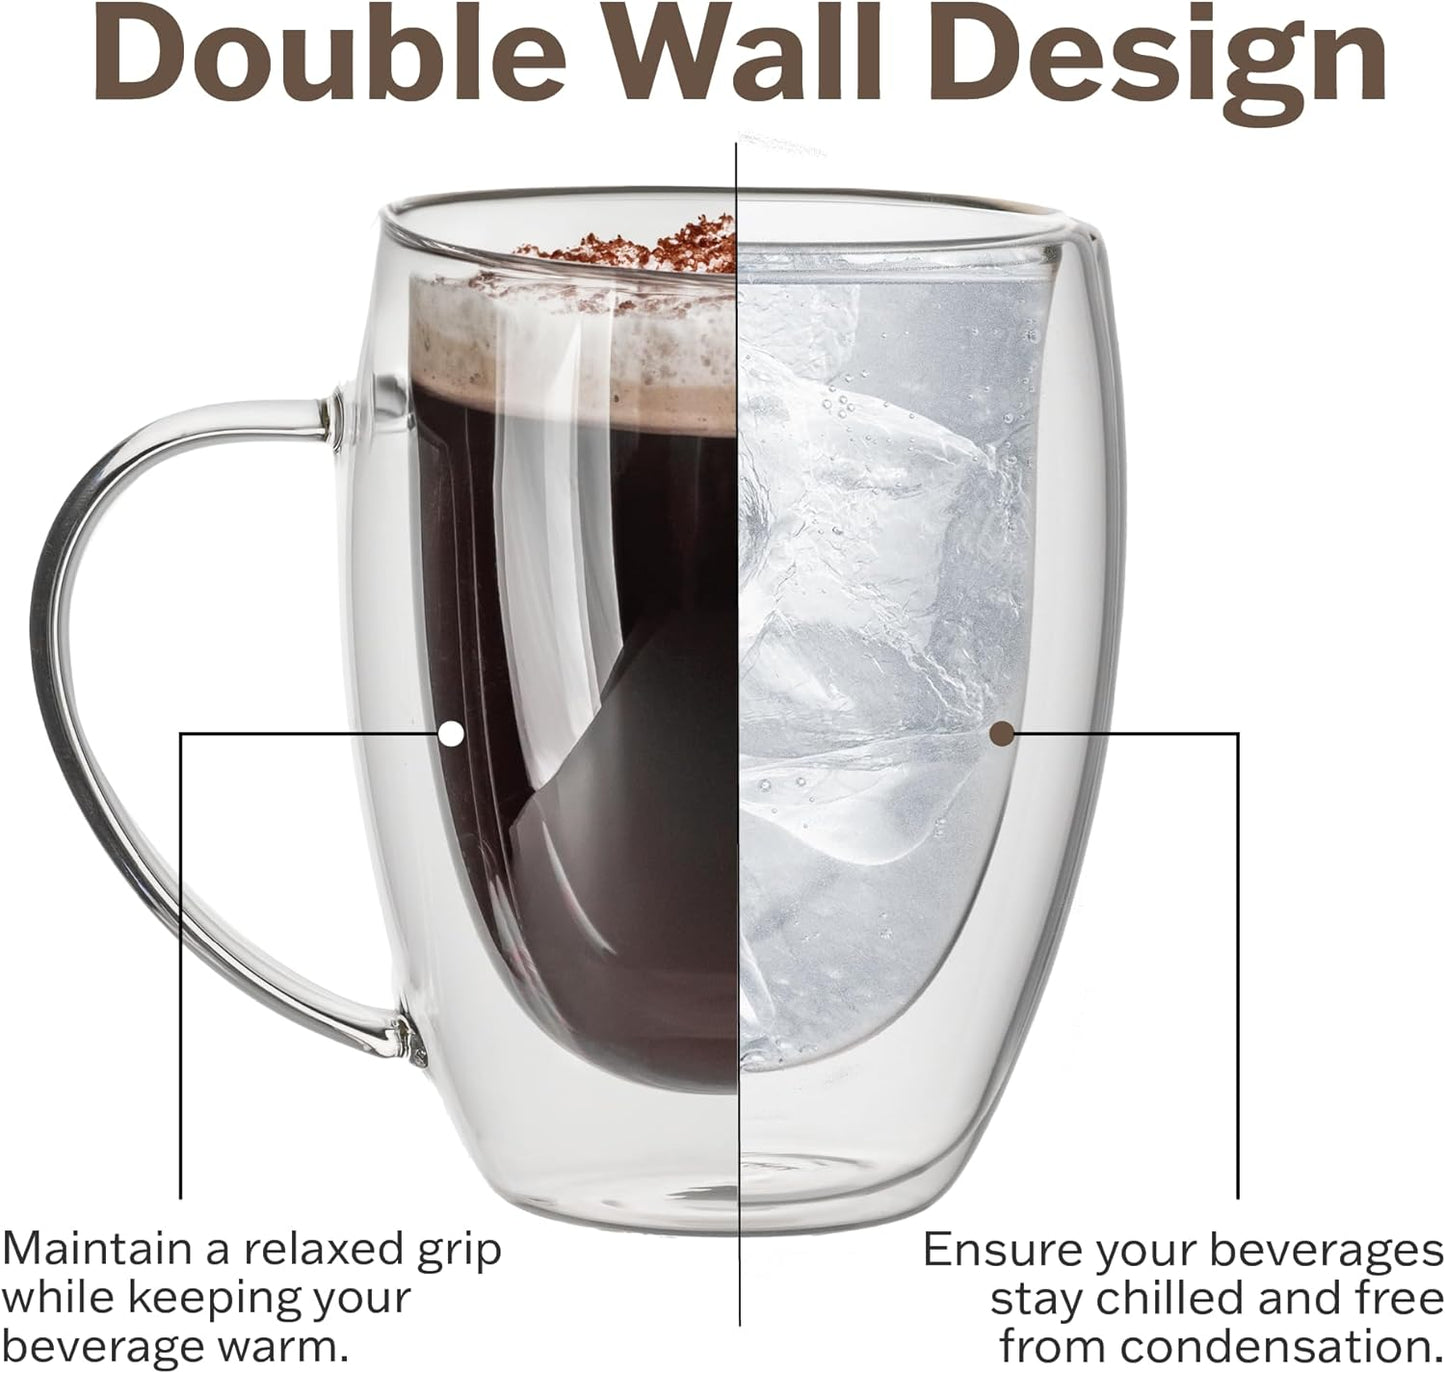 a double wall glass with a liquid in it with text: 'Double Wall Design Maintain a relaxed grip Ensure your beverages while keeping your stay chilled and free beverage warm. from condensation.'